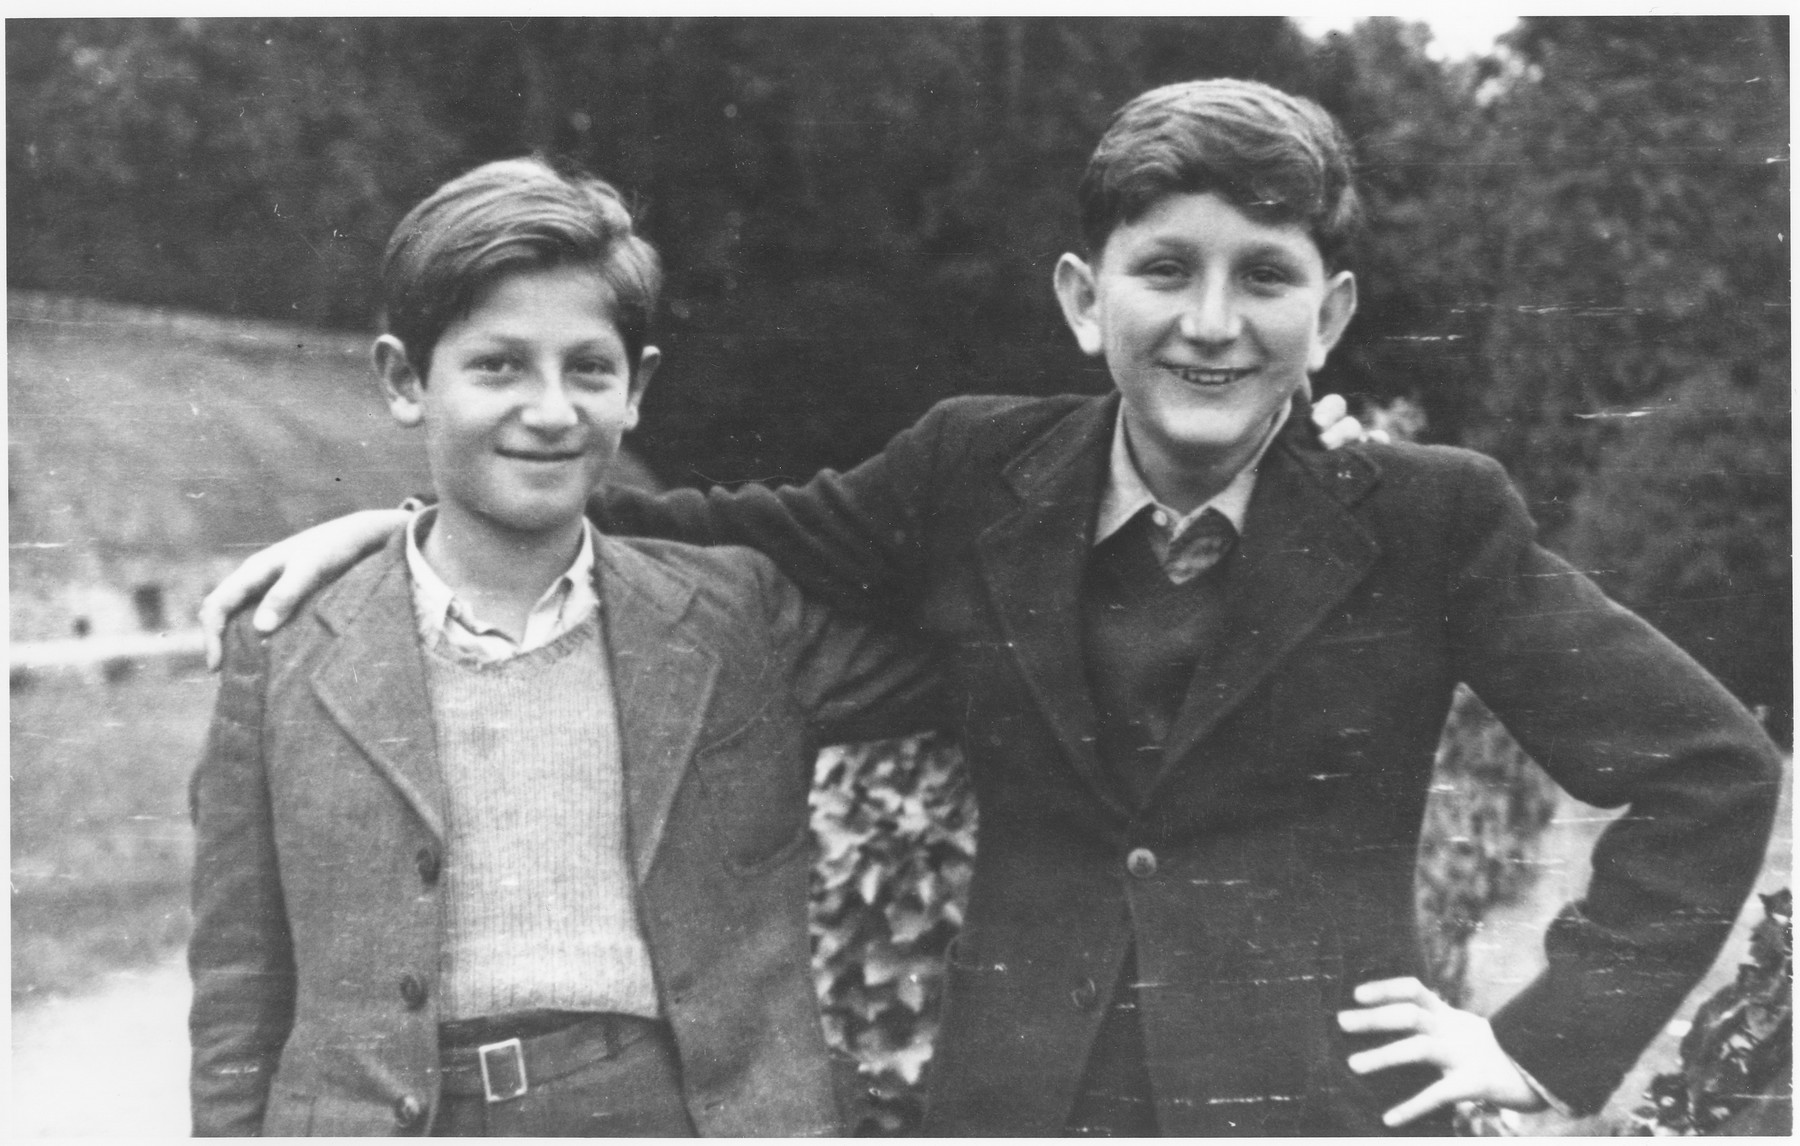 Ari Rosenberg (left) and Ivar Segalowitz (right) pose outside during the time they were residents of the Champigny children's home.